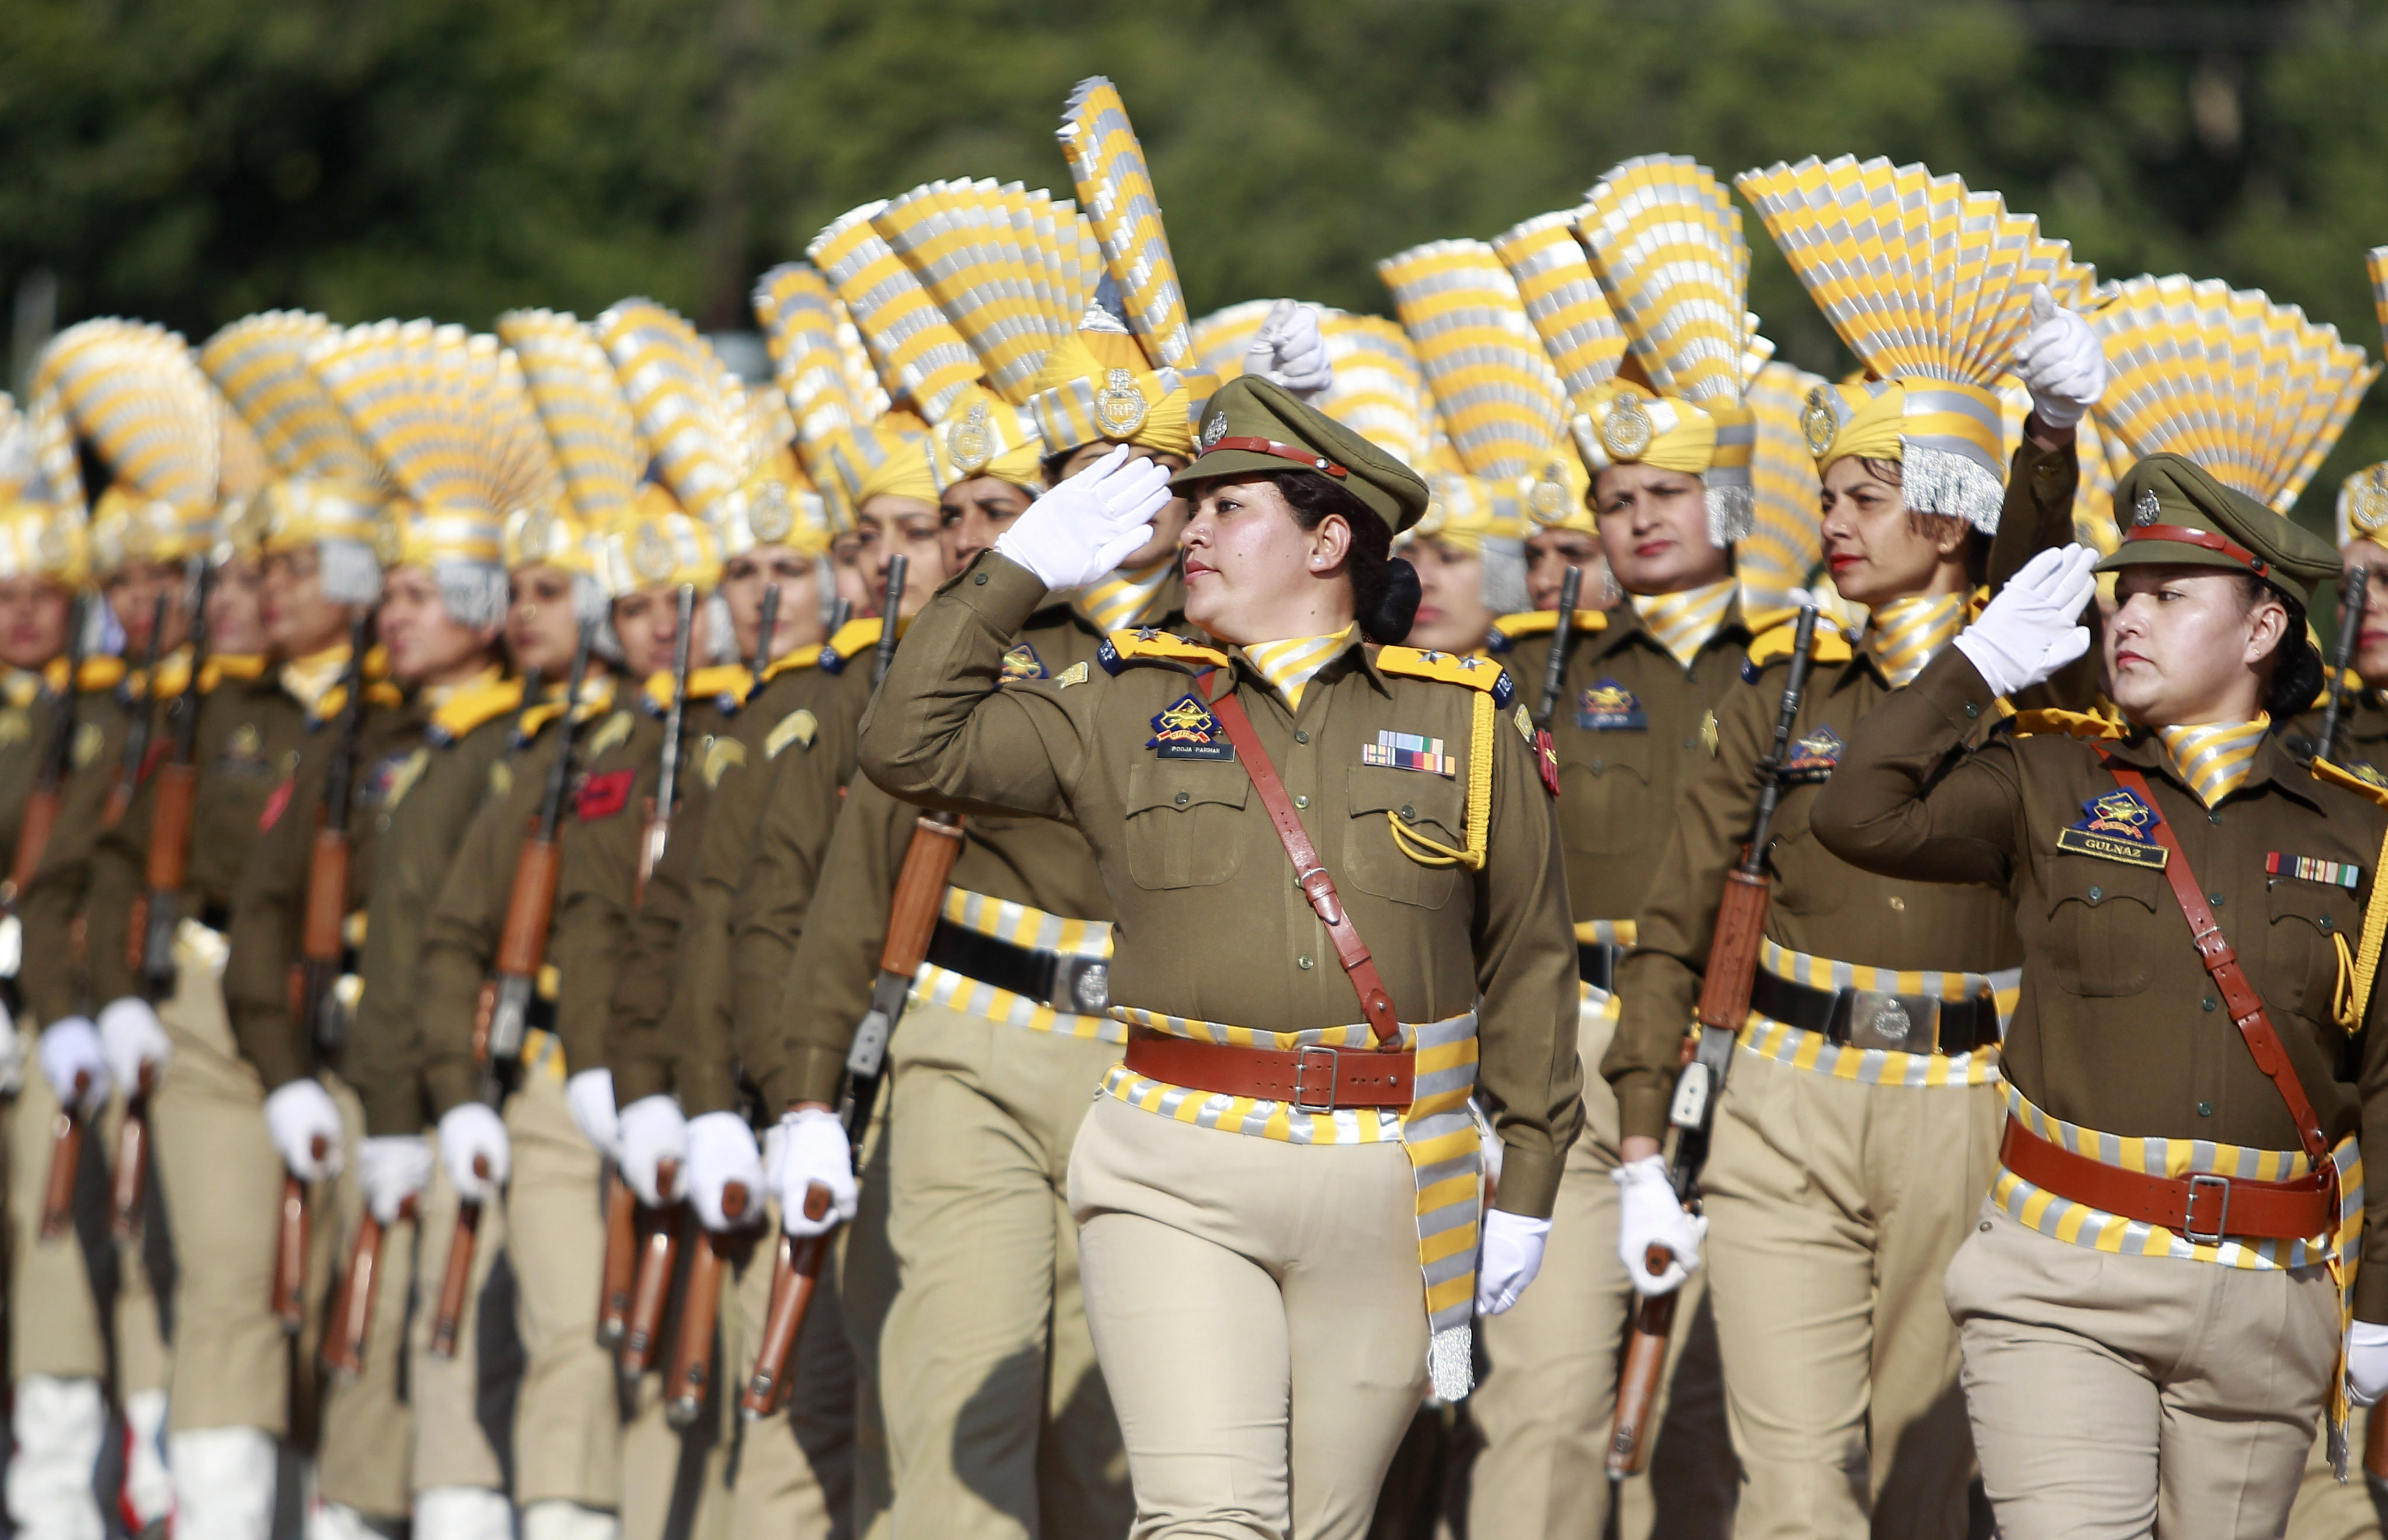 Indian policewomen march during a Republic Day parade in Jammu, India, Saturday, Jan. 26, 2019. (AP Photo/Channi Anand)